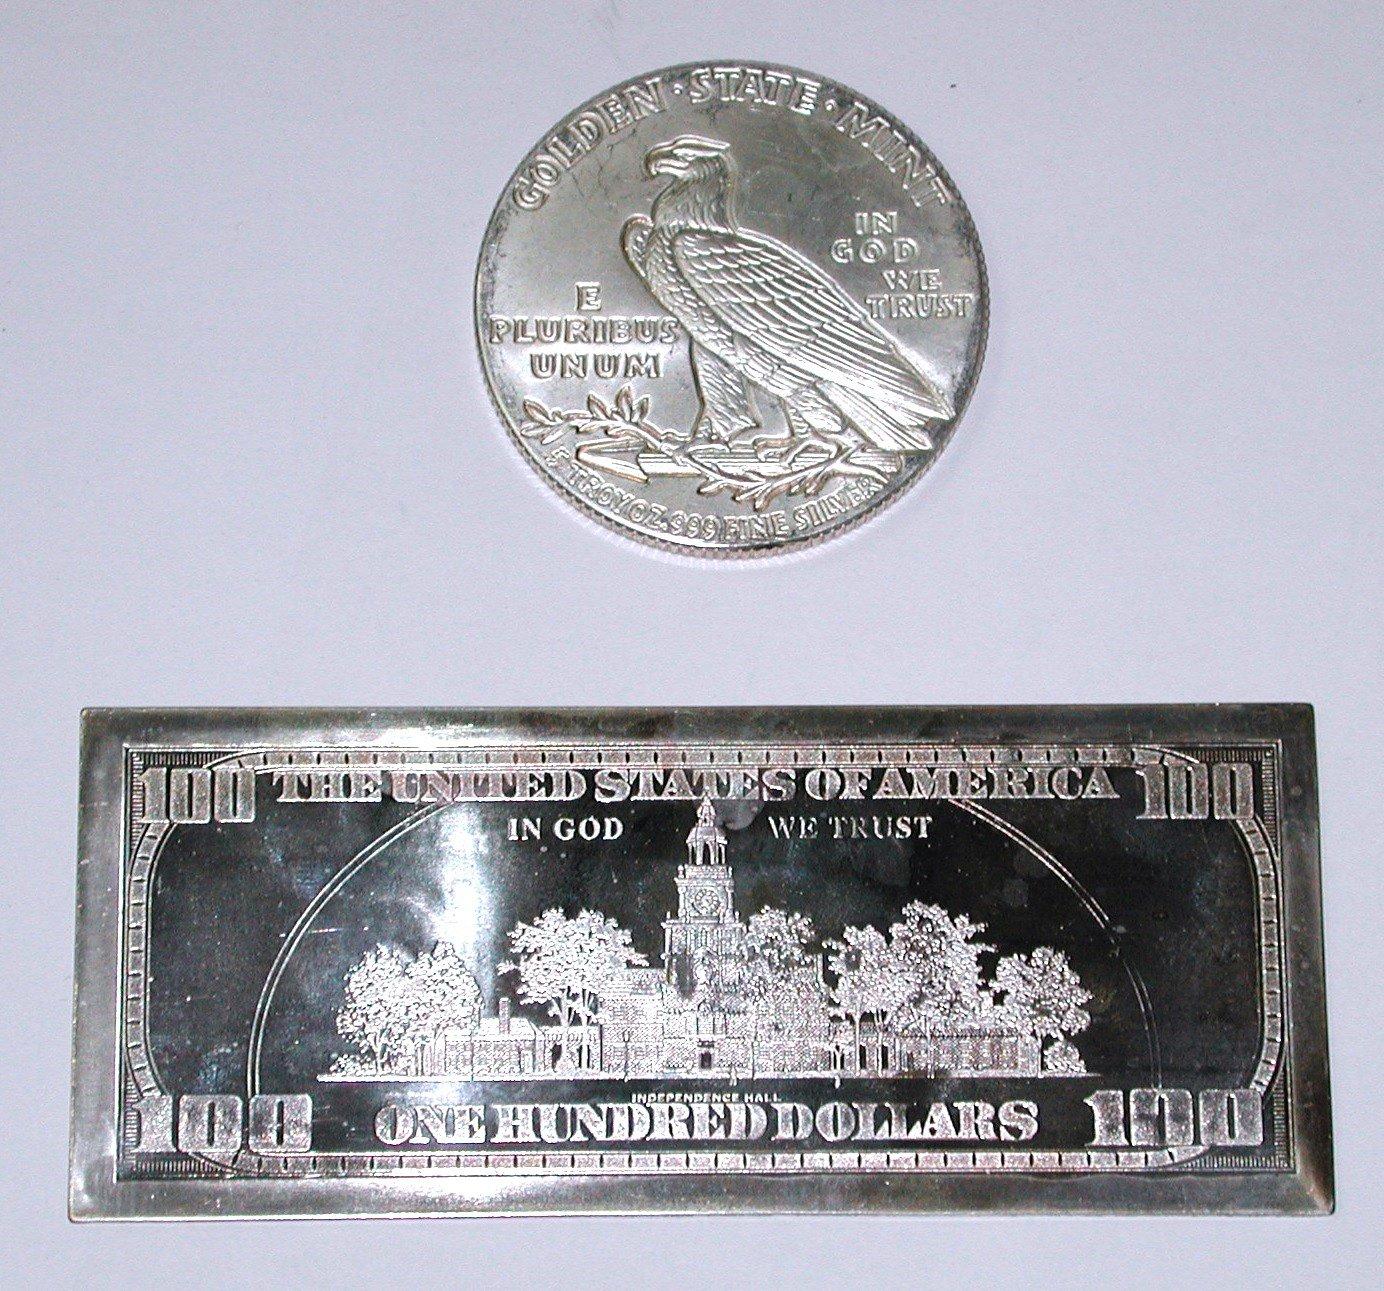 FOUR (4) TROY OUNCE SILVER BAR + FIVE (5) TROY OUNCE SILVER ROUND (9 TROY OZ TOTAL)